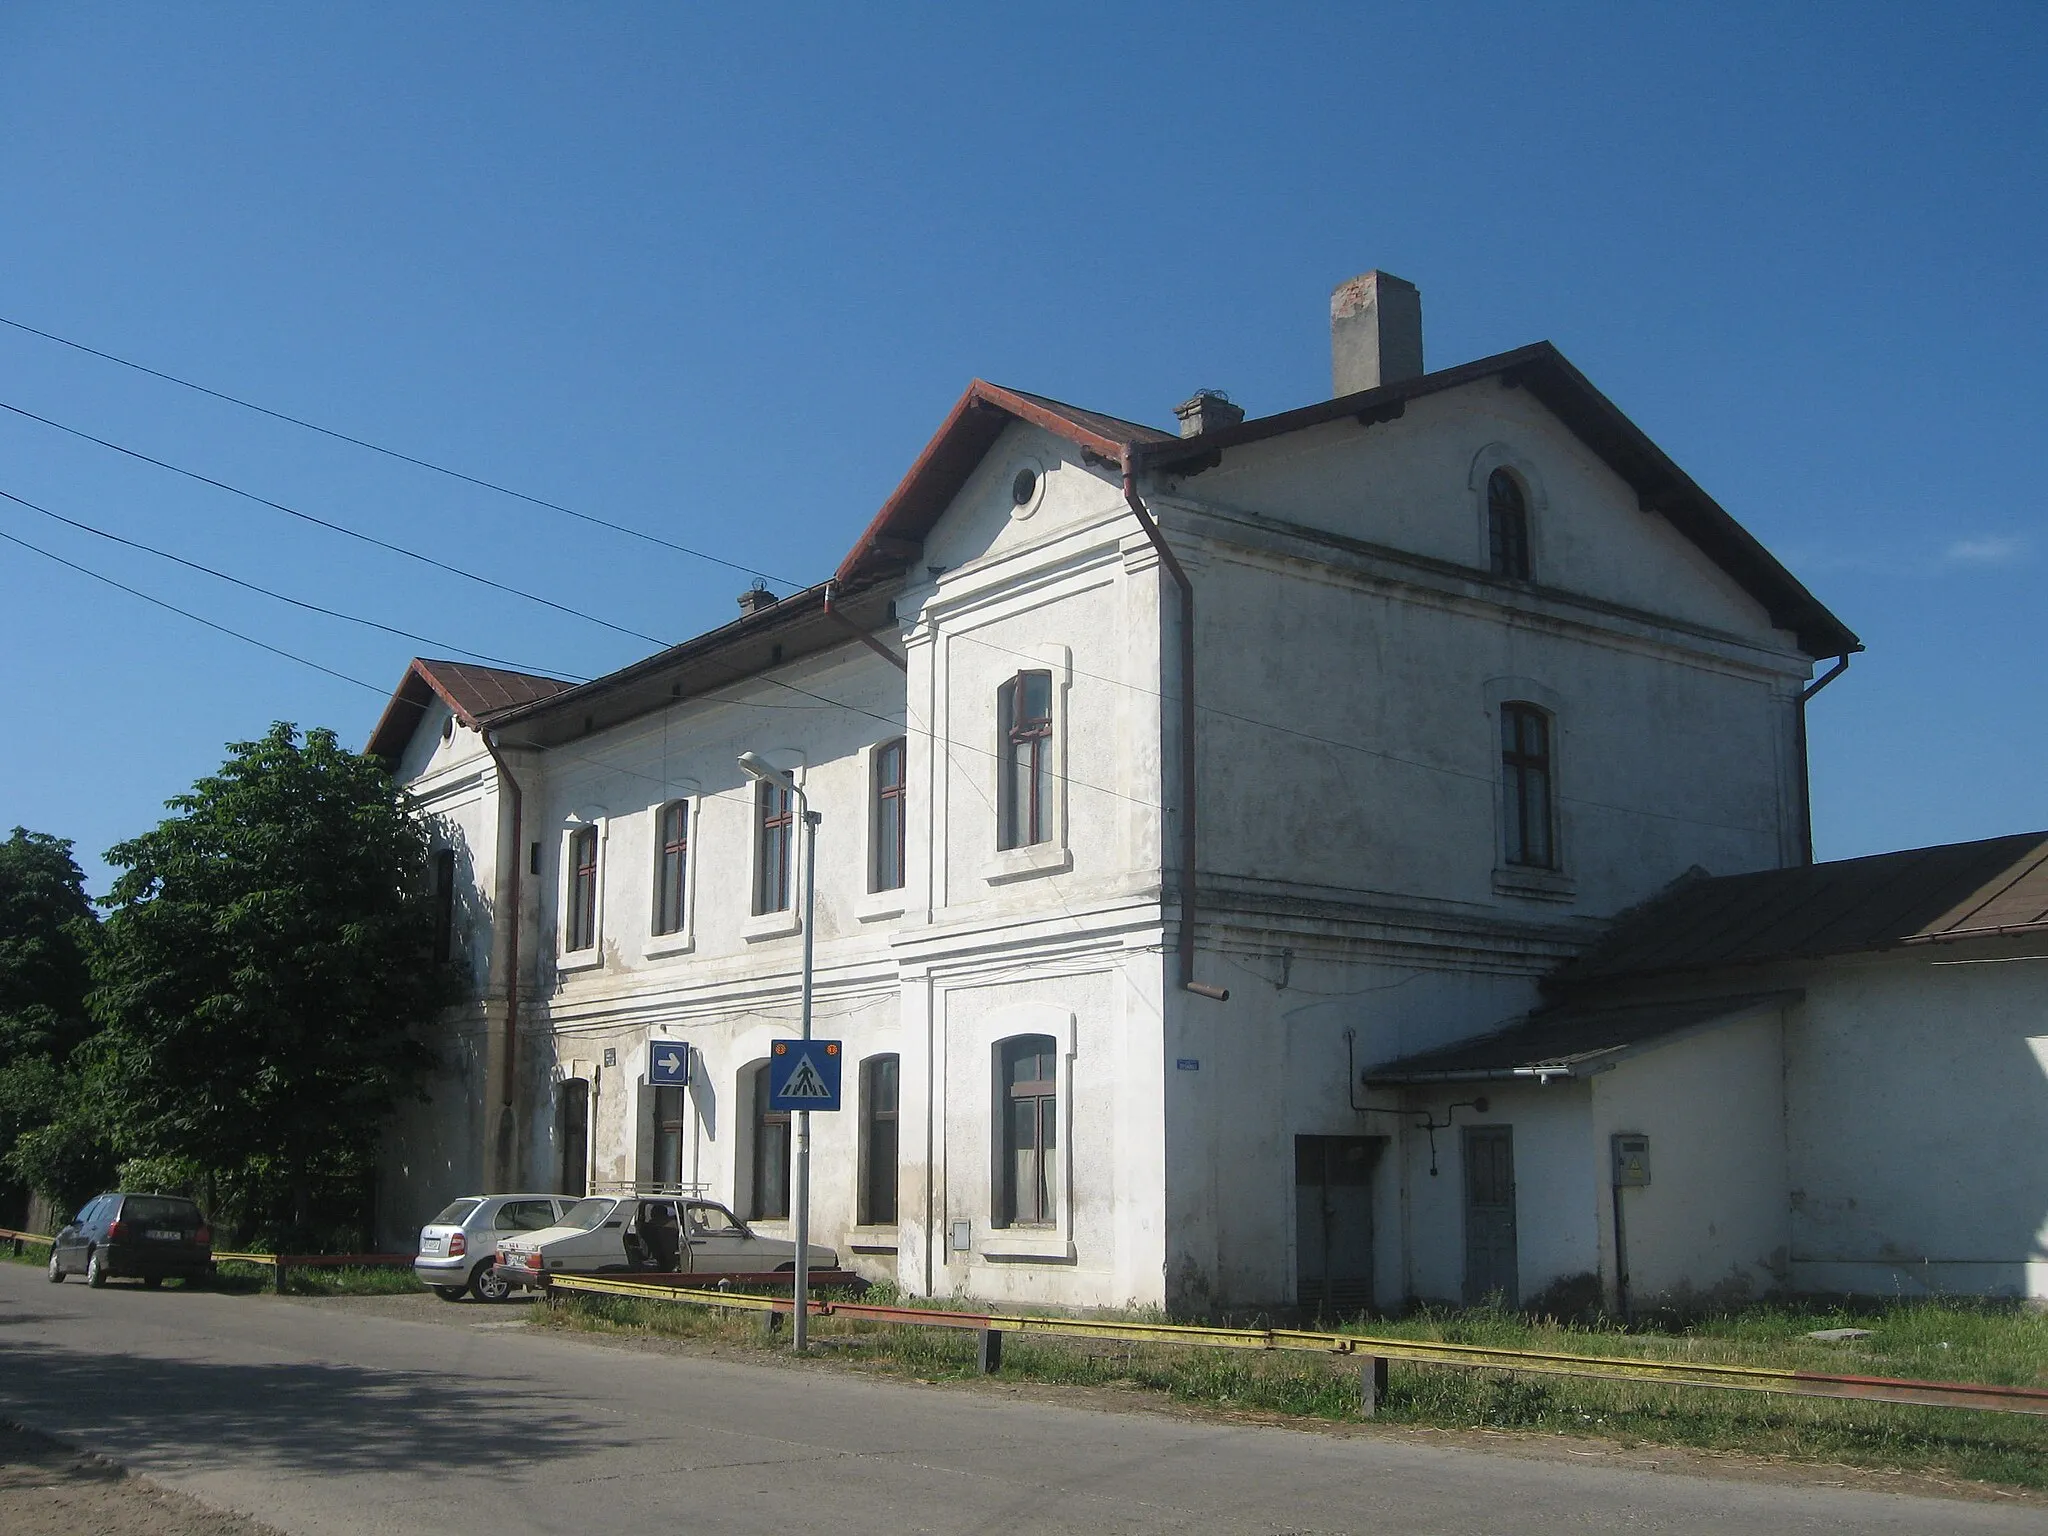 Photo showing: The train station in Dolhasca, Suceava County, Romania